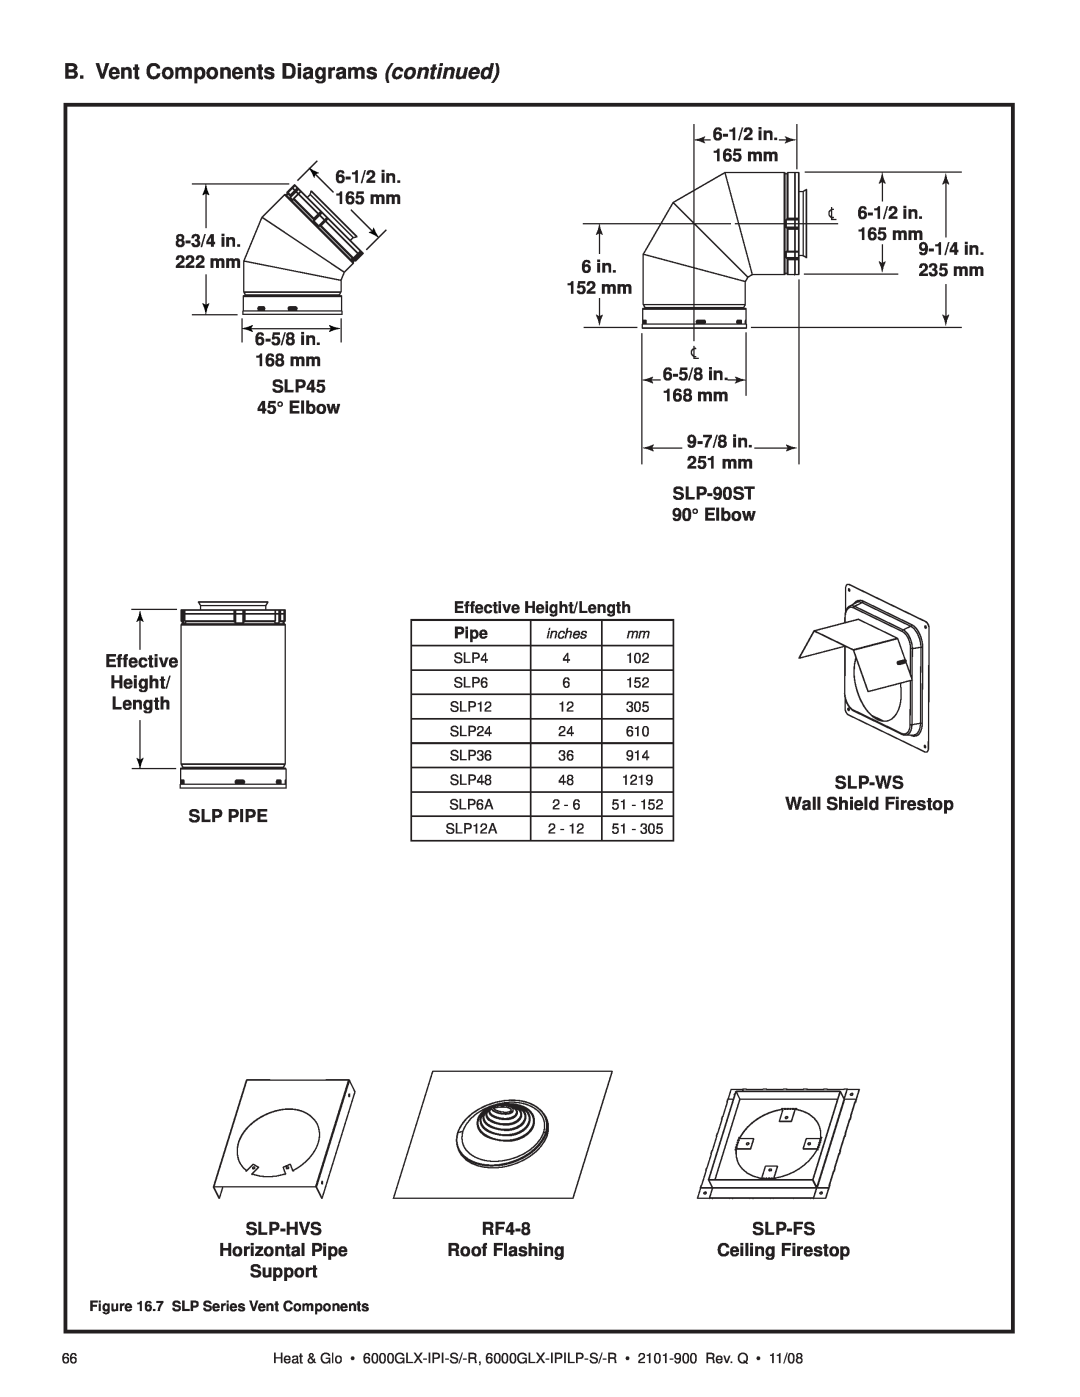 Heat & Glo LifeStyle 6000GLX-IPI-S/-R, 6000GLX-IPILP-S/-R owner manual B. Vent Components Diagrams continued, 6-1/2in 